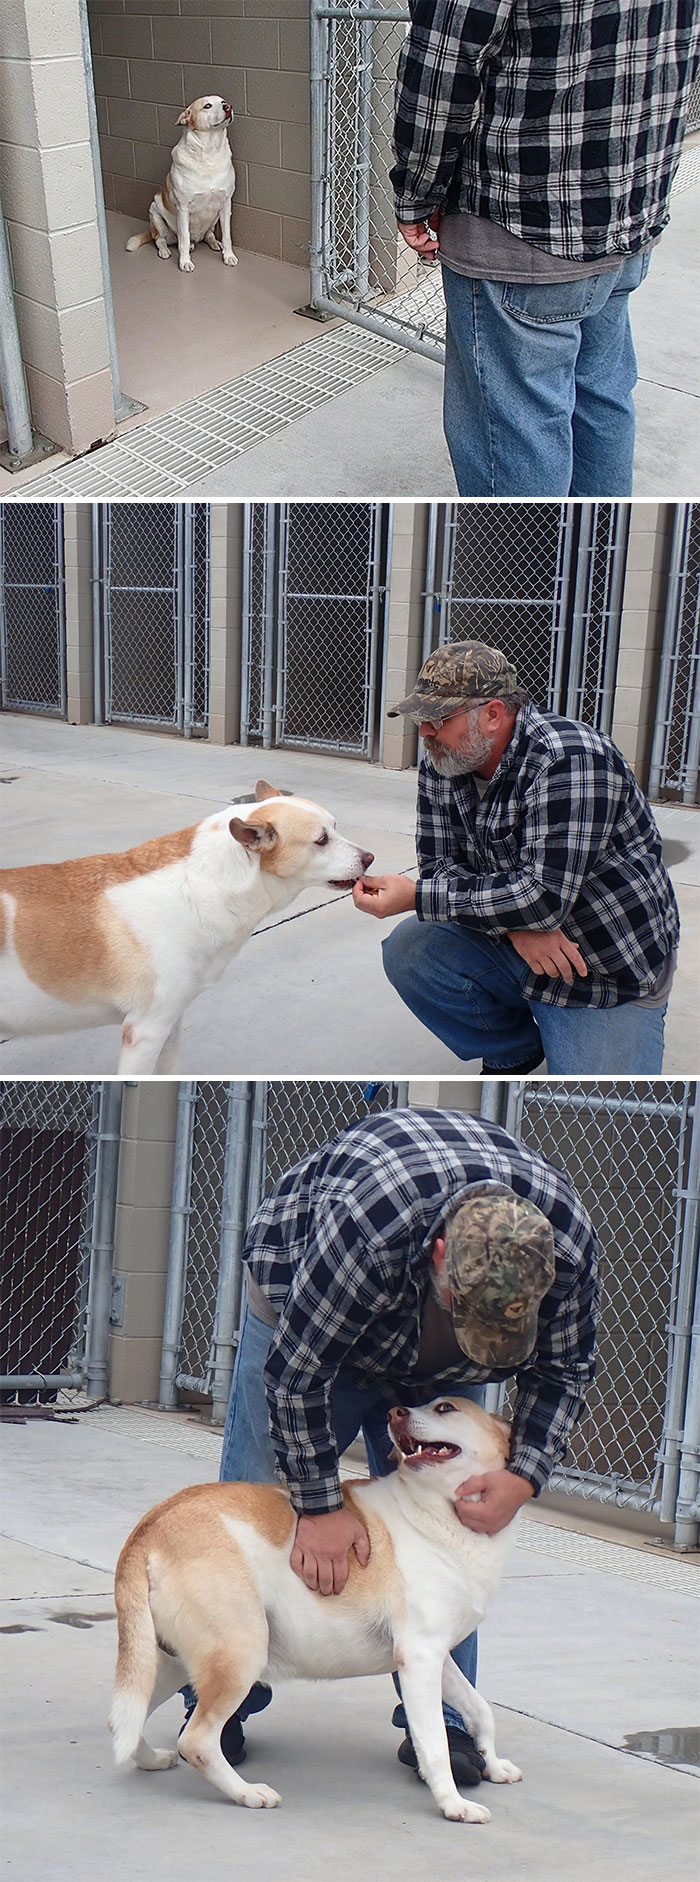 Dog Reunites With Its Owners After Three Years